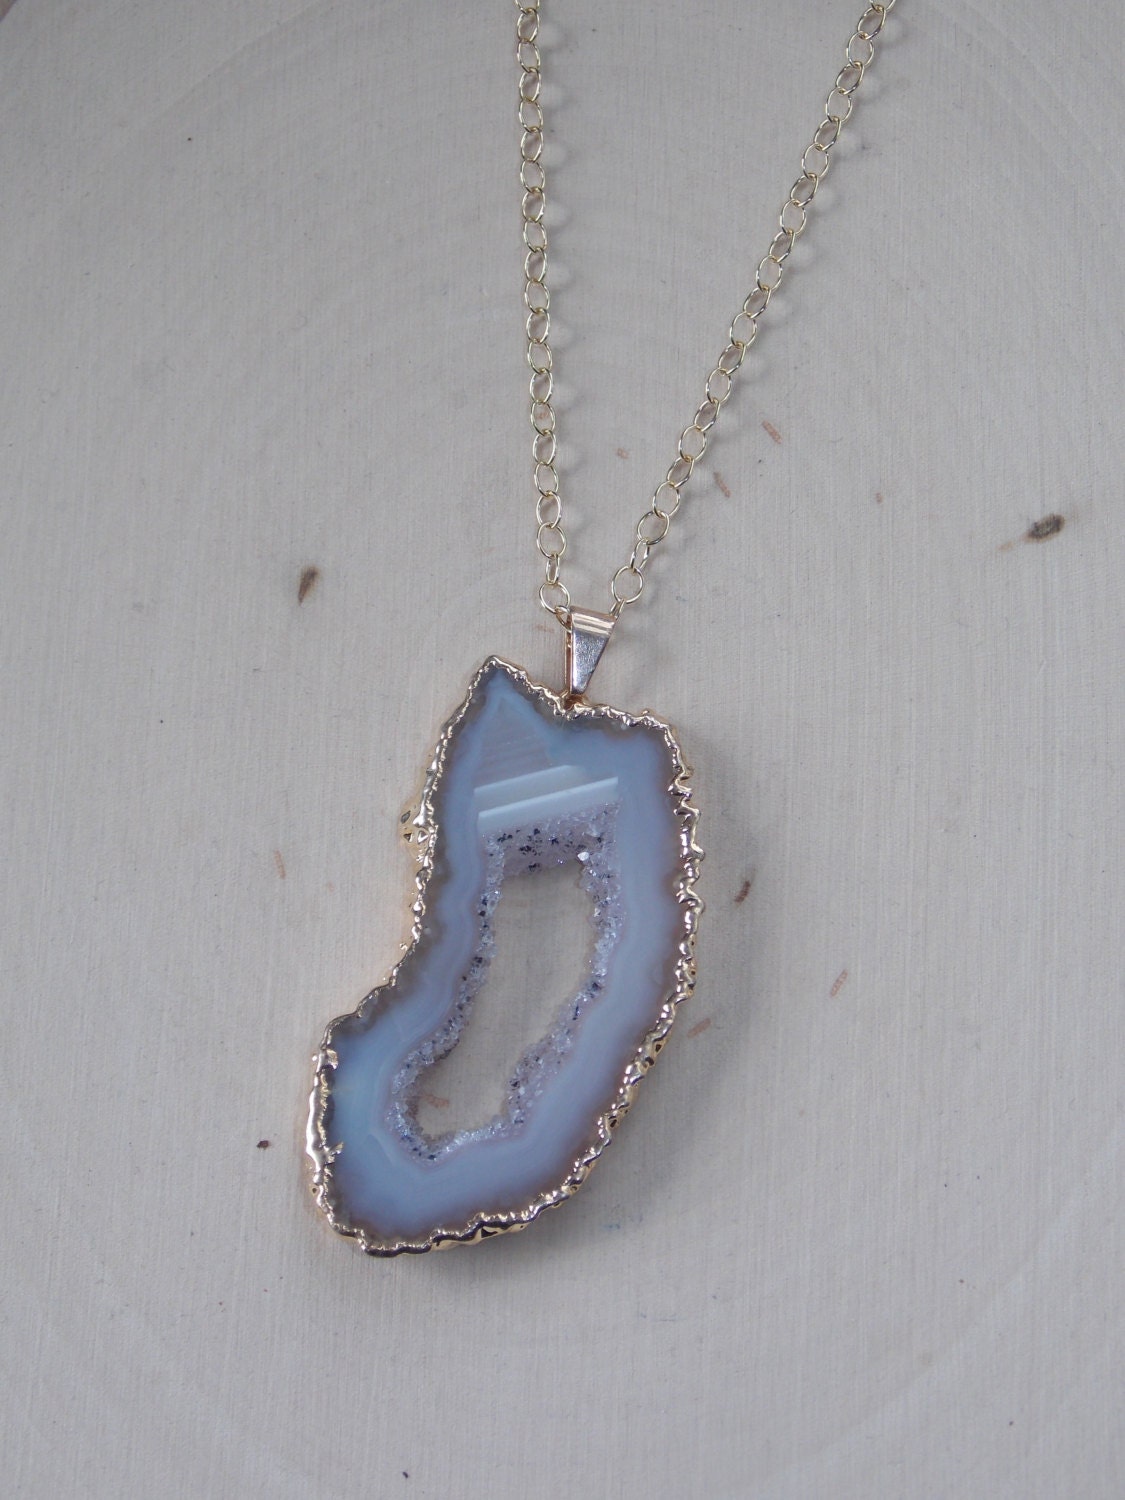 Geode Necklace / Geode Slice Necklace / Raw by MalieCreations